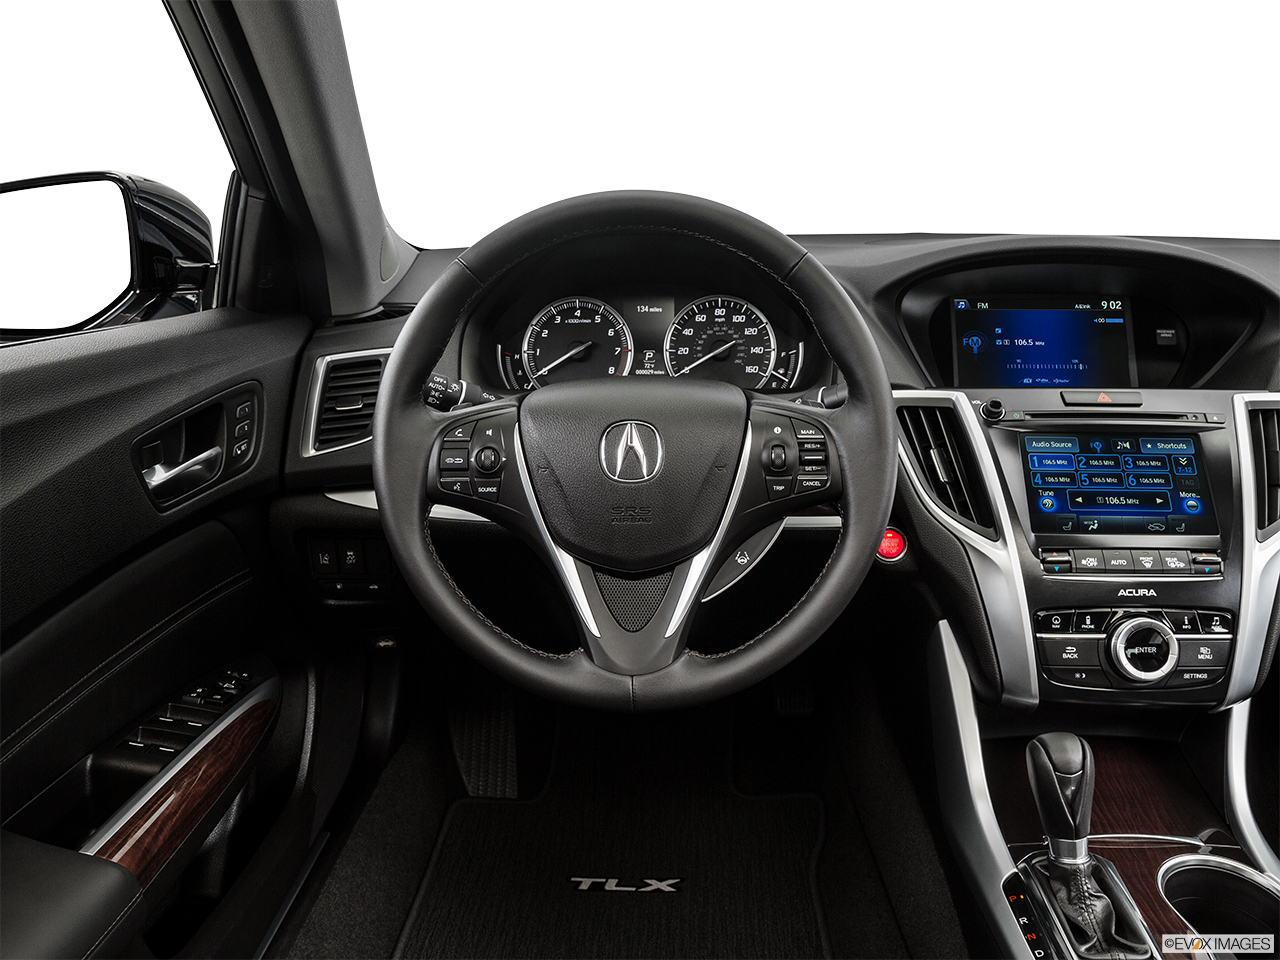 2015 Acura TLX 2.4 8-DCP P-AWS Steering wheel/Center Console. 